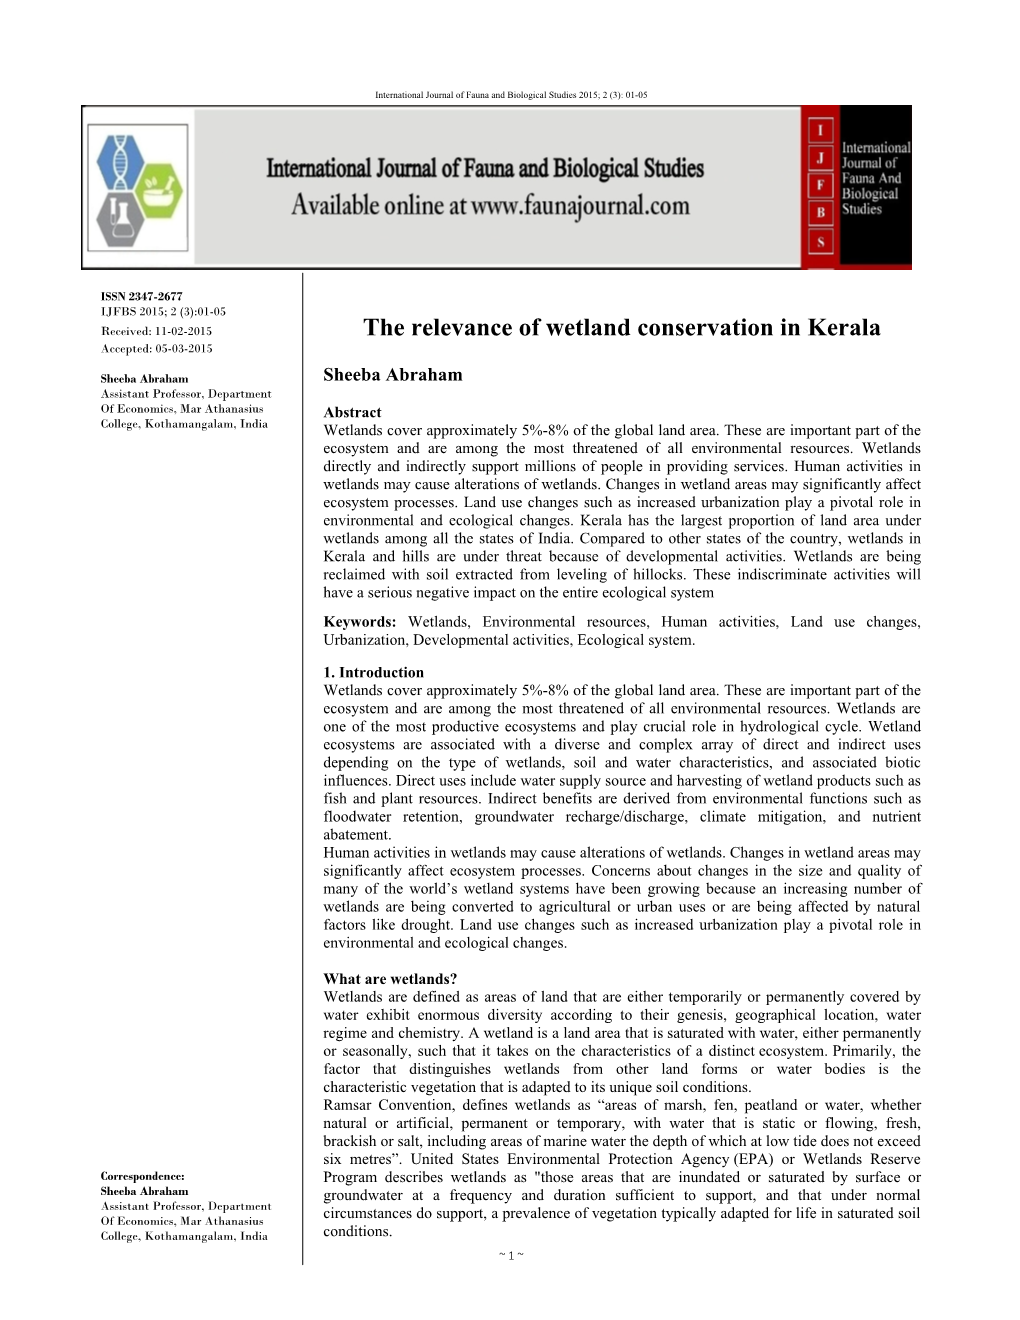 The Relevance of Wetland Conservation in Kerala Accepted: 05-03-2015